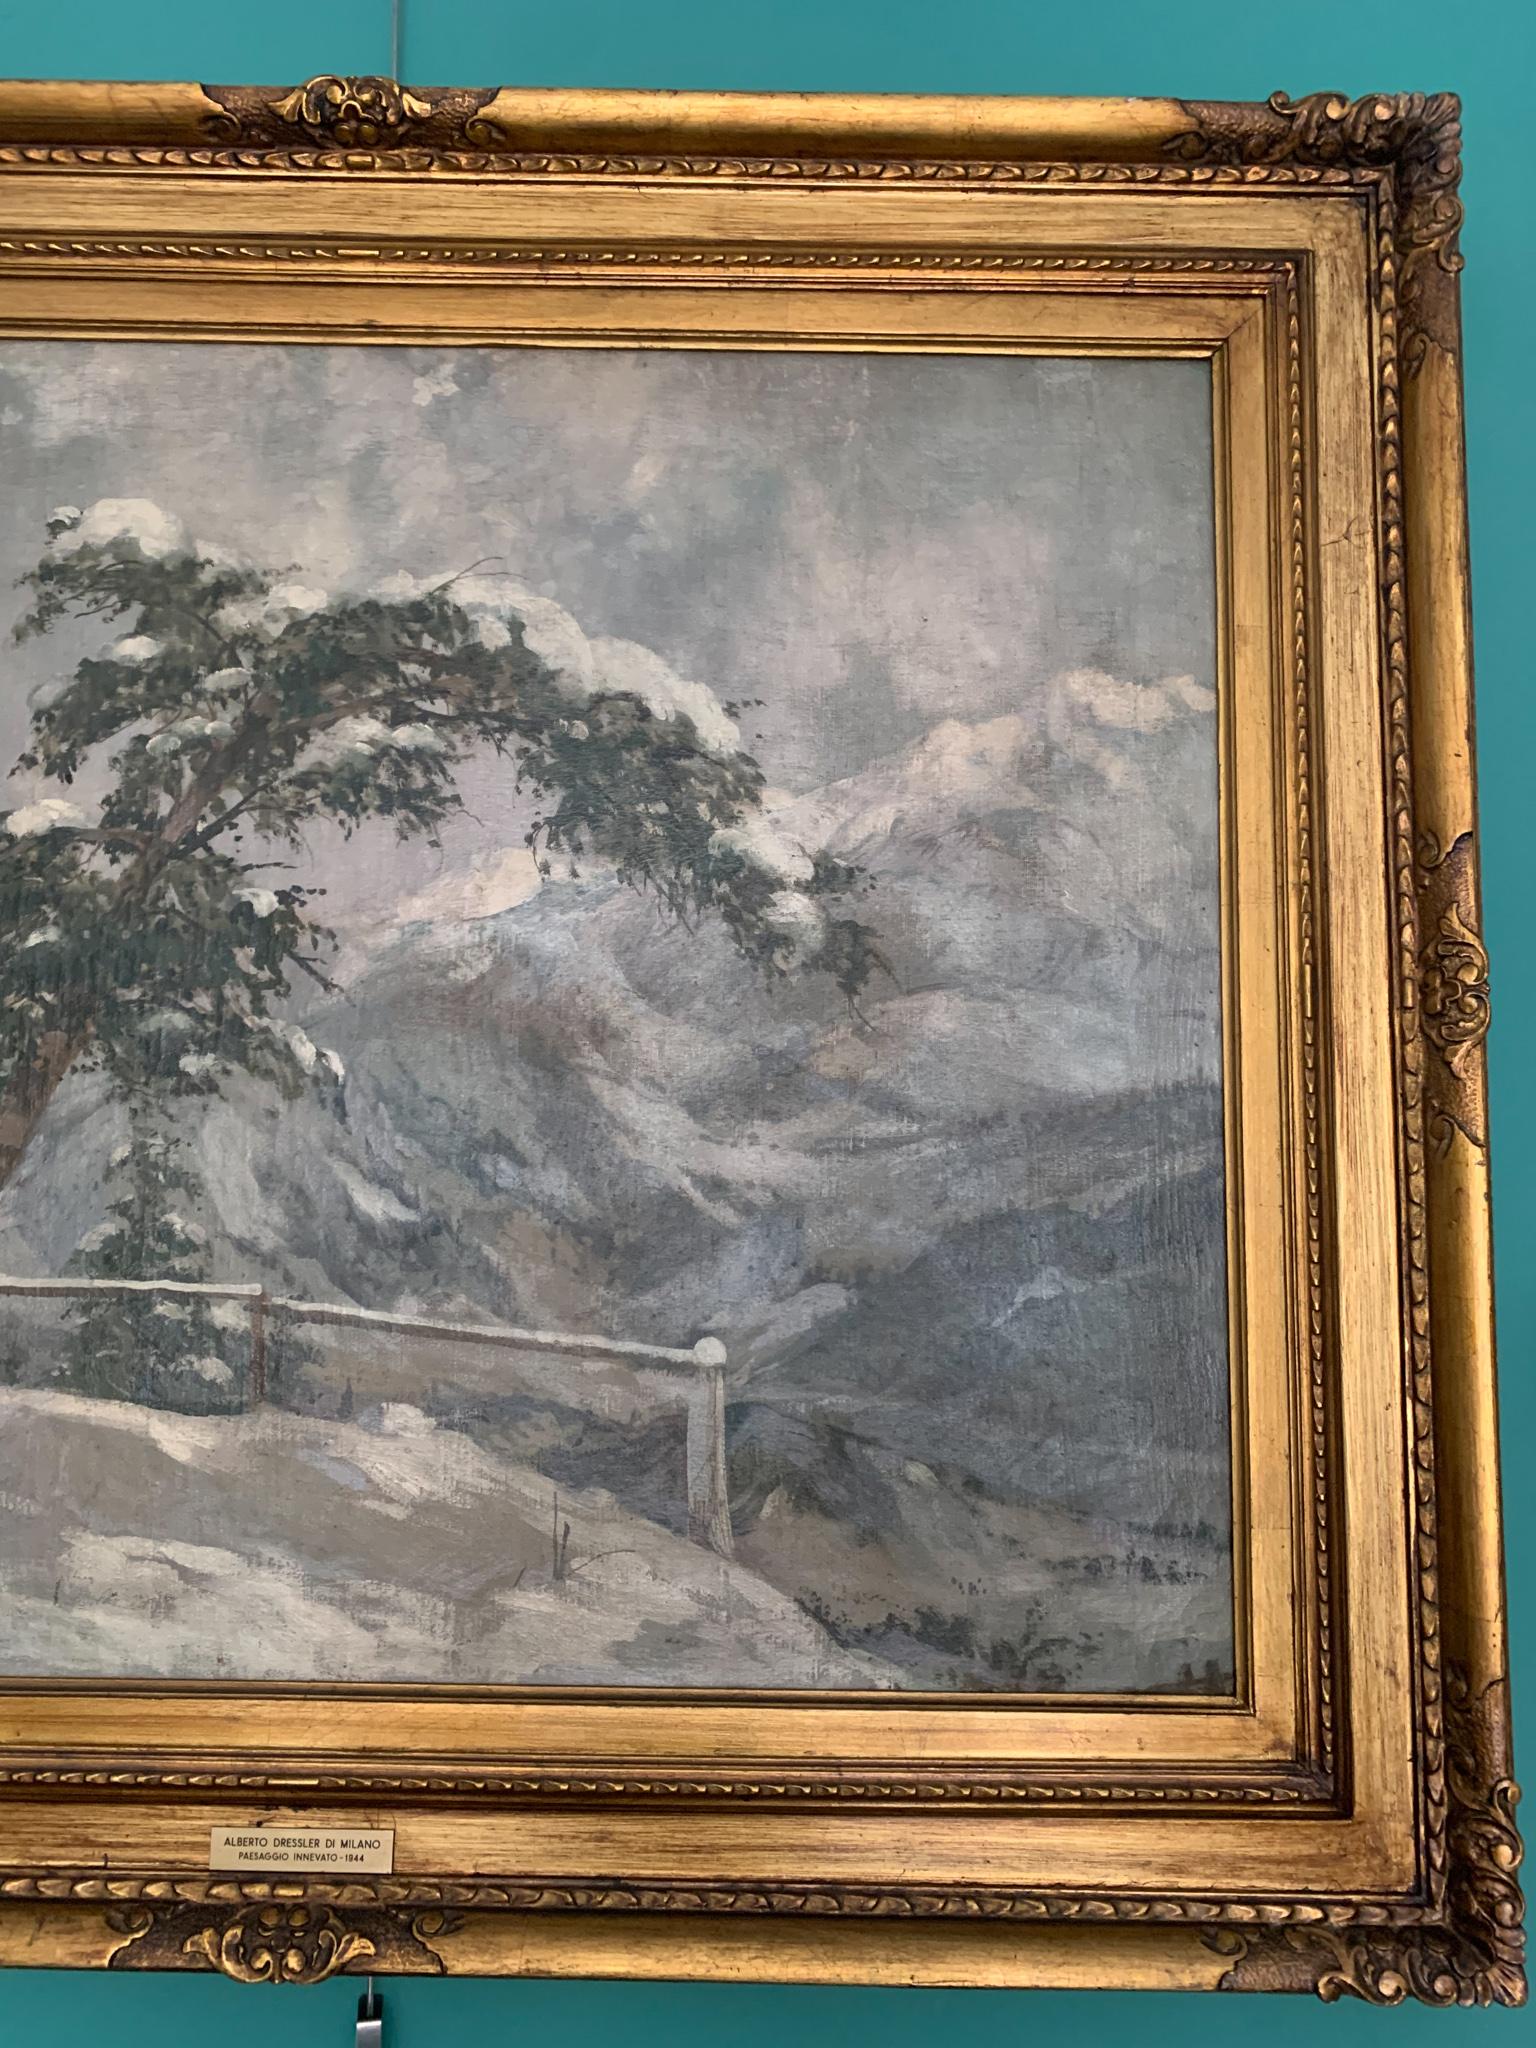 Italian Oil Painting on Canvas by Alberto Dressler 'Snowy Landscape' from 1944 For Sale 1